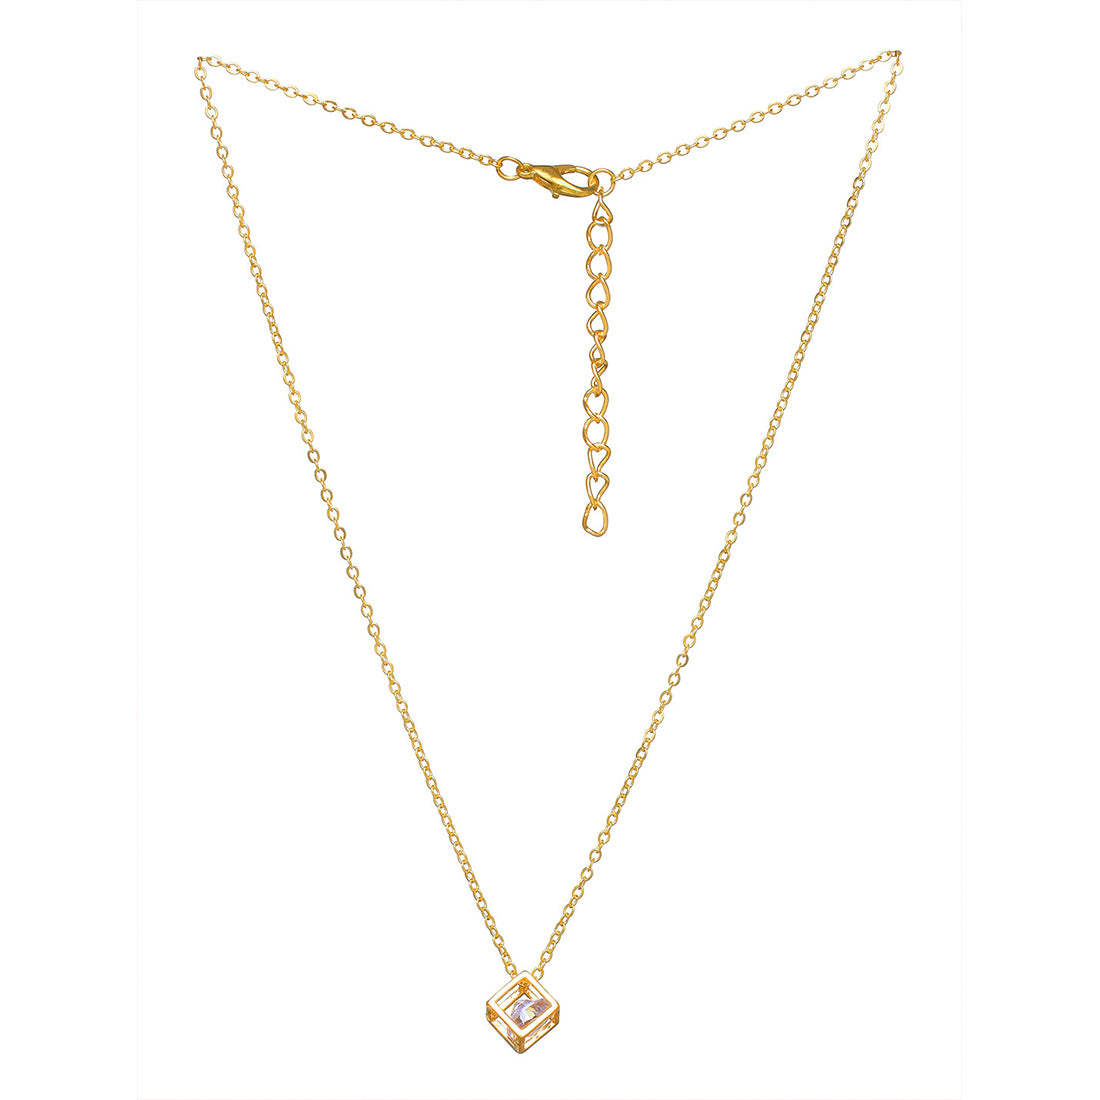 Single Layer Dainty Gold Necklace - 3D Cube with Diamante